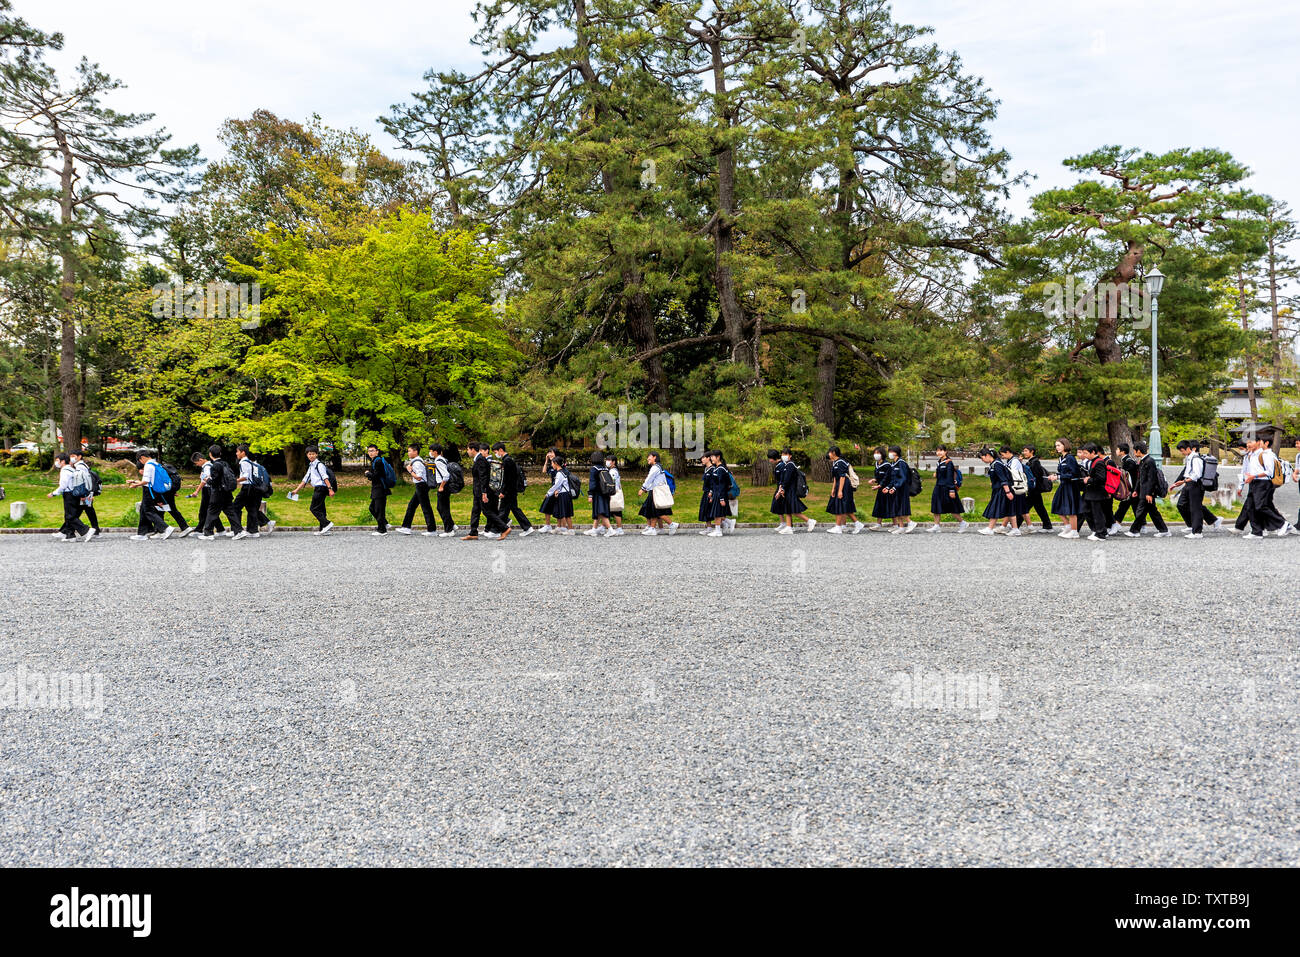 Kyoto, Japan - April 17, 2019: Many people school children boys and girls walking in line on gravel street road near Imperial Palace on field trip Stock Photo